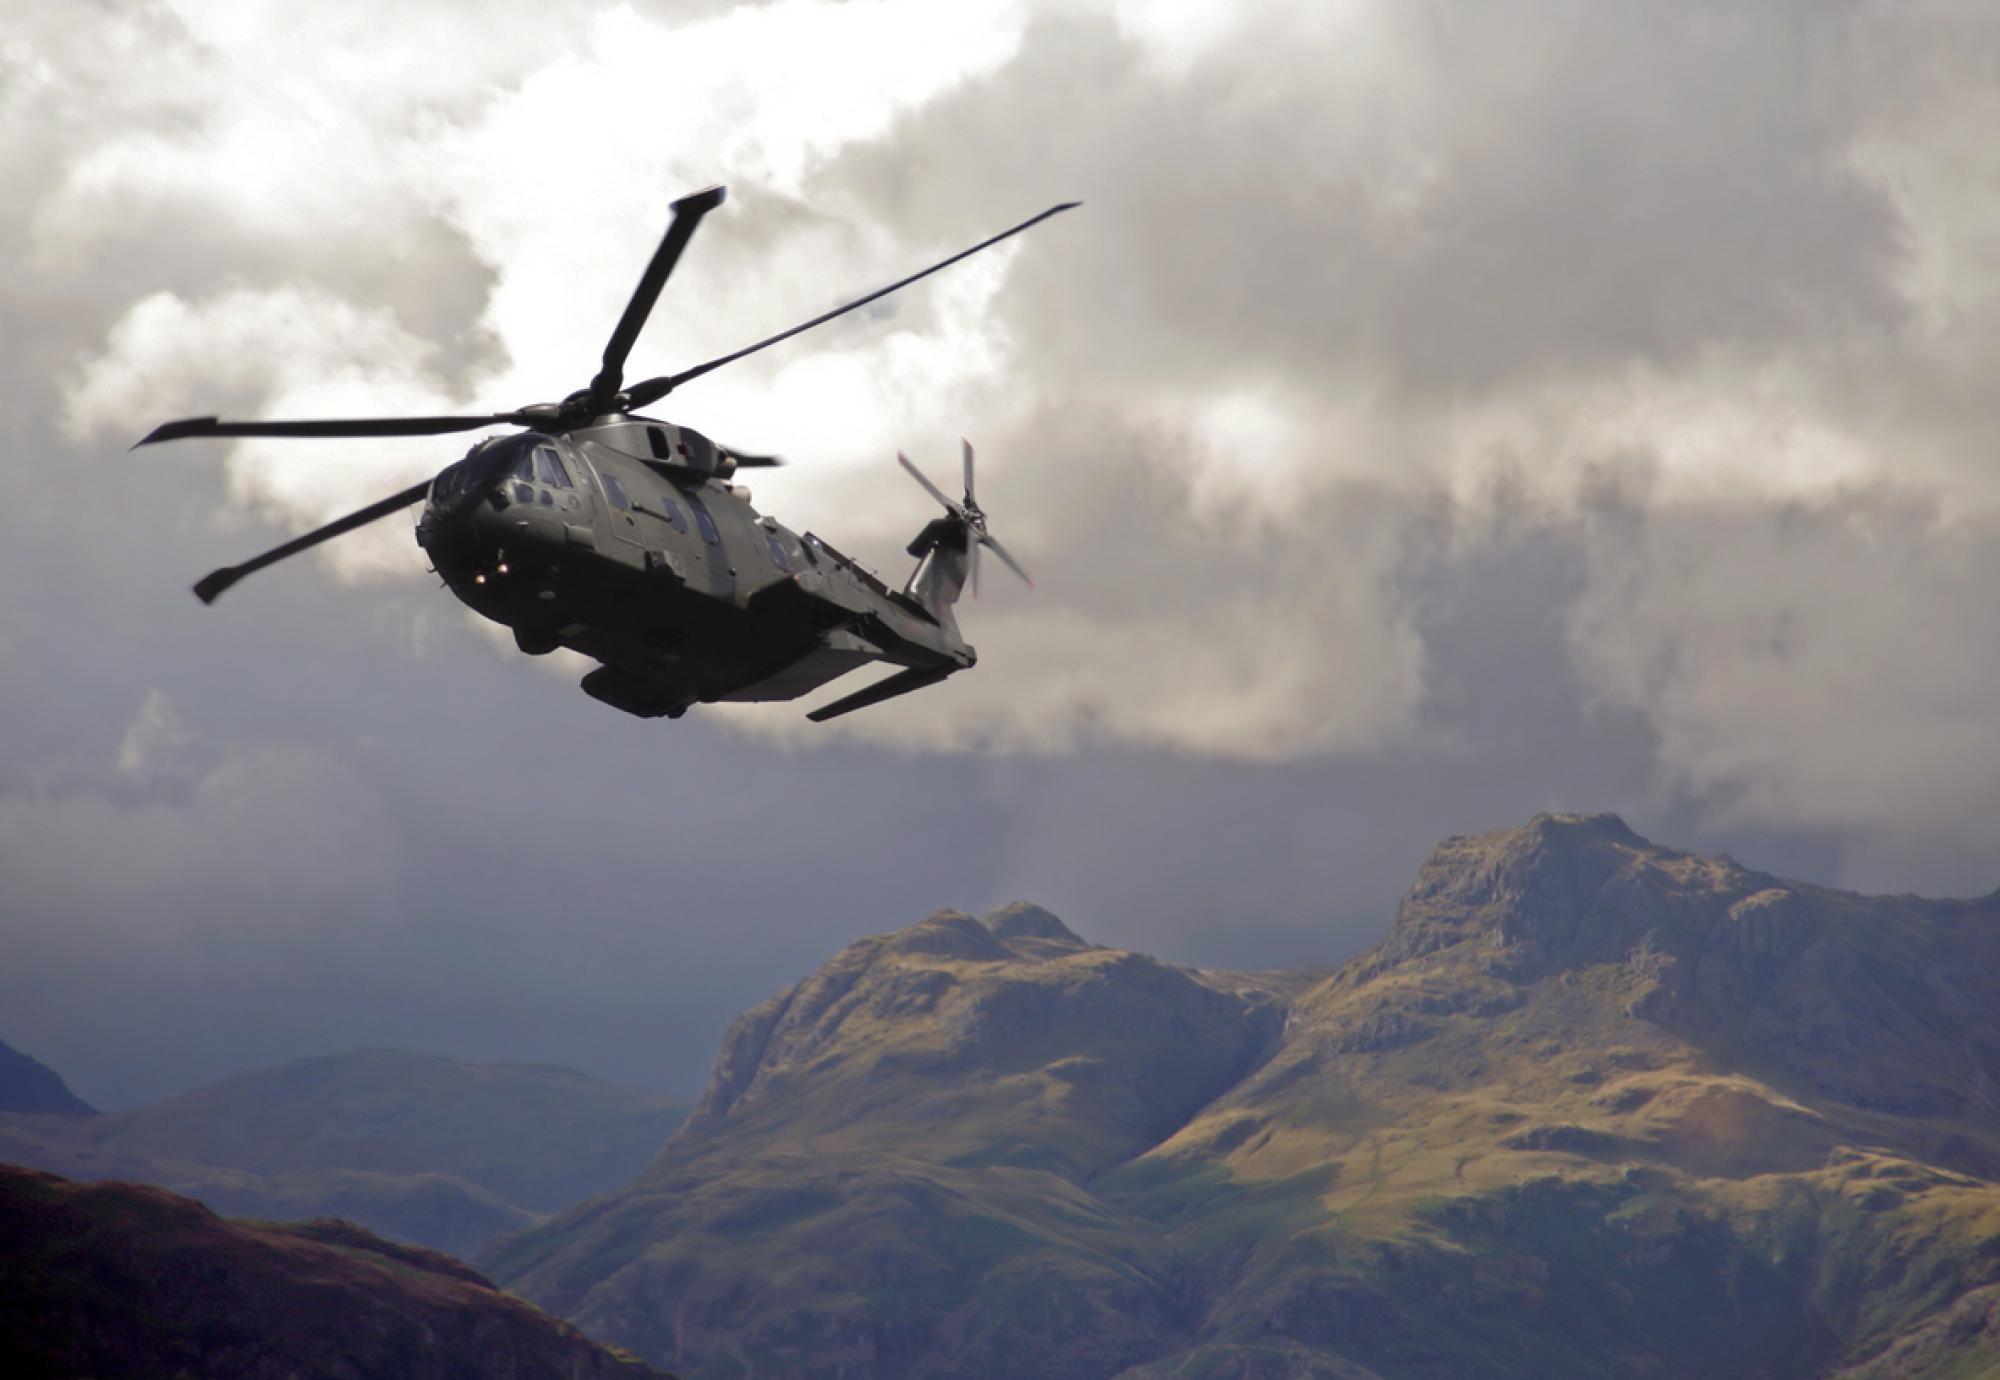 RAF Merlin helicopter hugs valleys in the lake district mountains